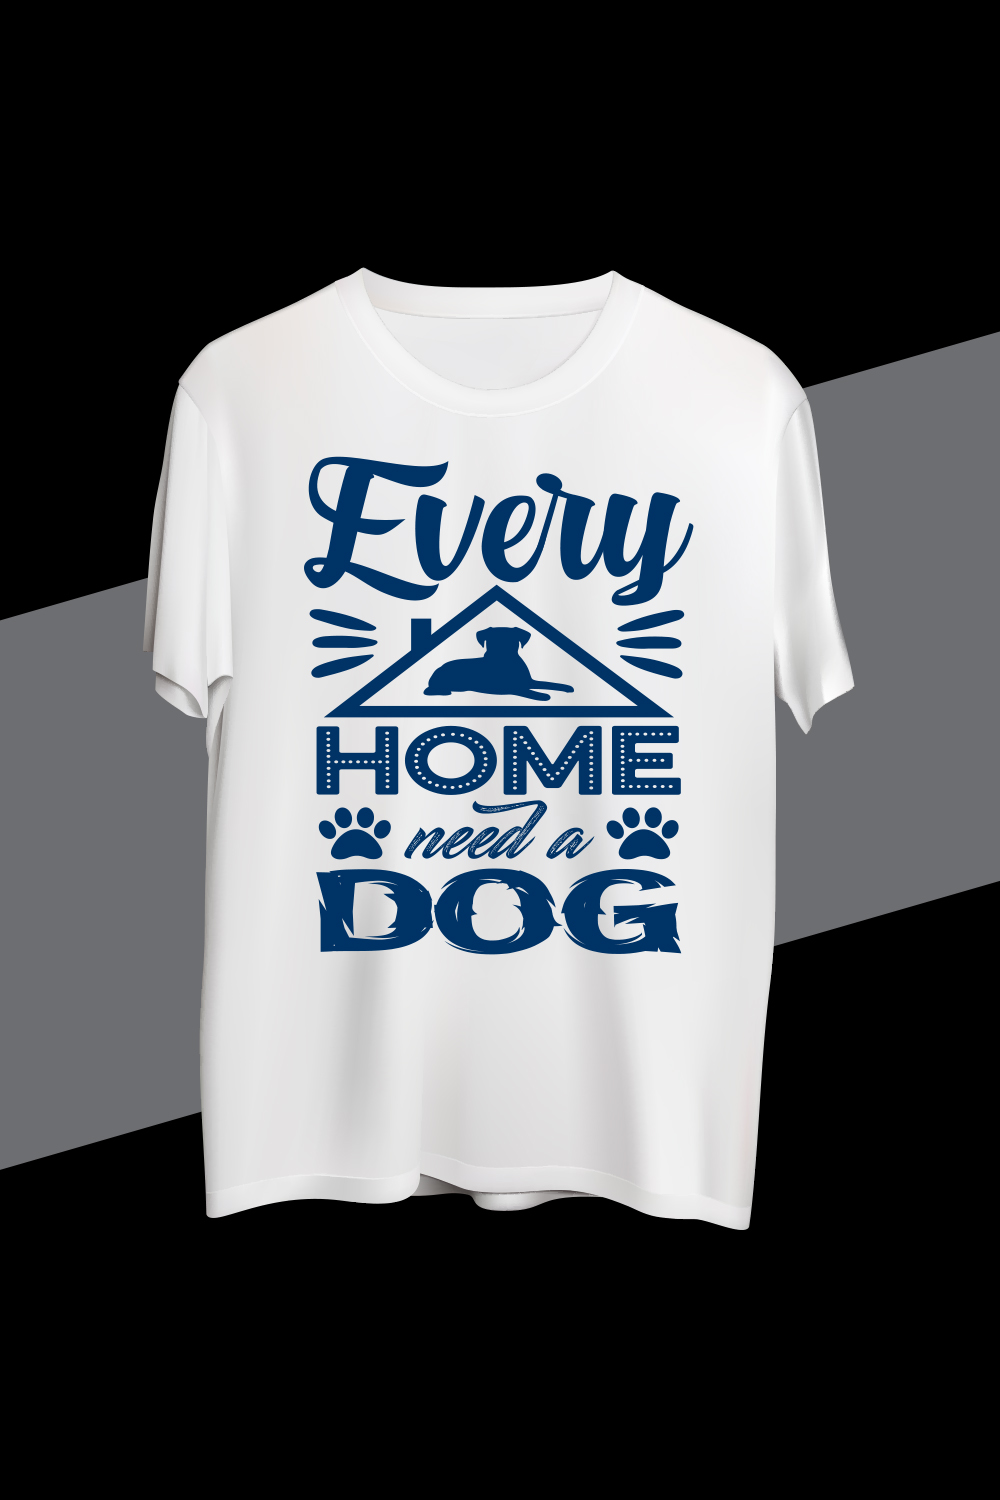 Every home need a dog T-shirt design pinterest preview image.